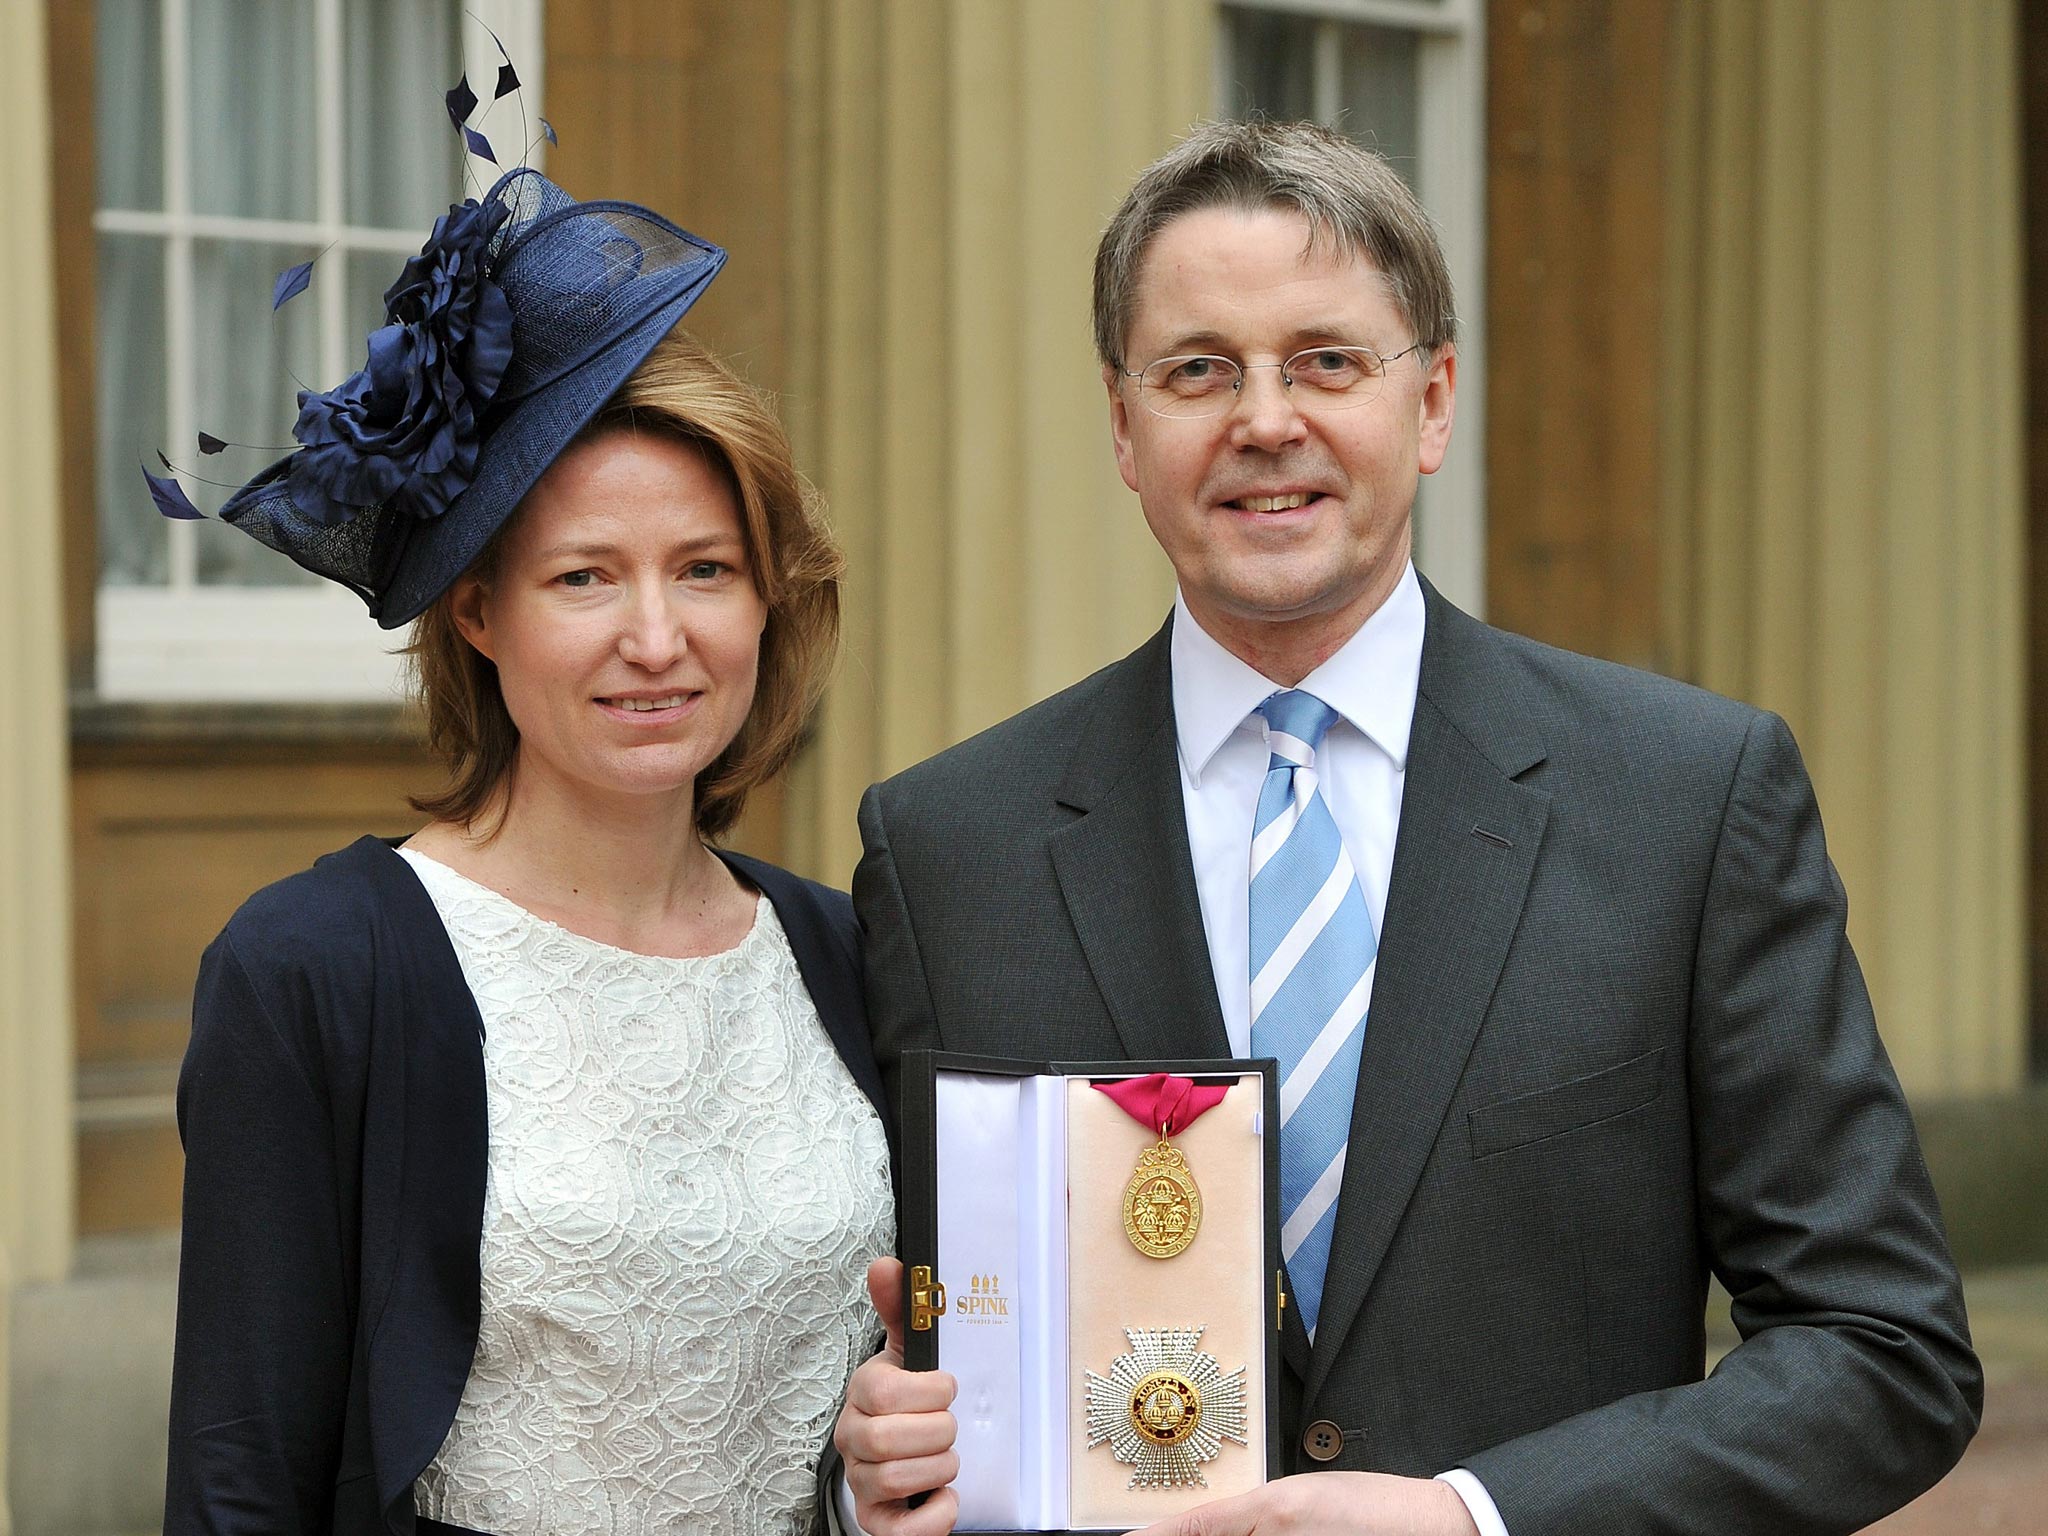 Jeremy Heywood, the Cabinet Secretary, with his wife
Suzanne, who ran a BBC review